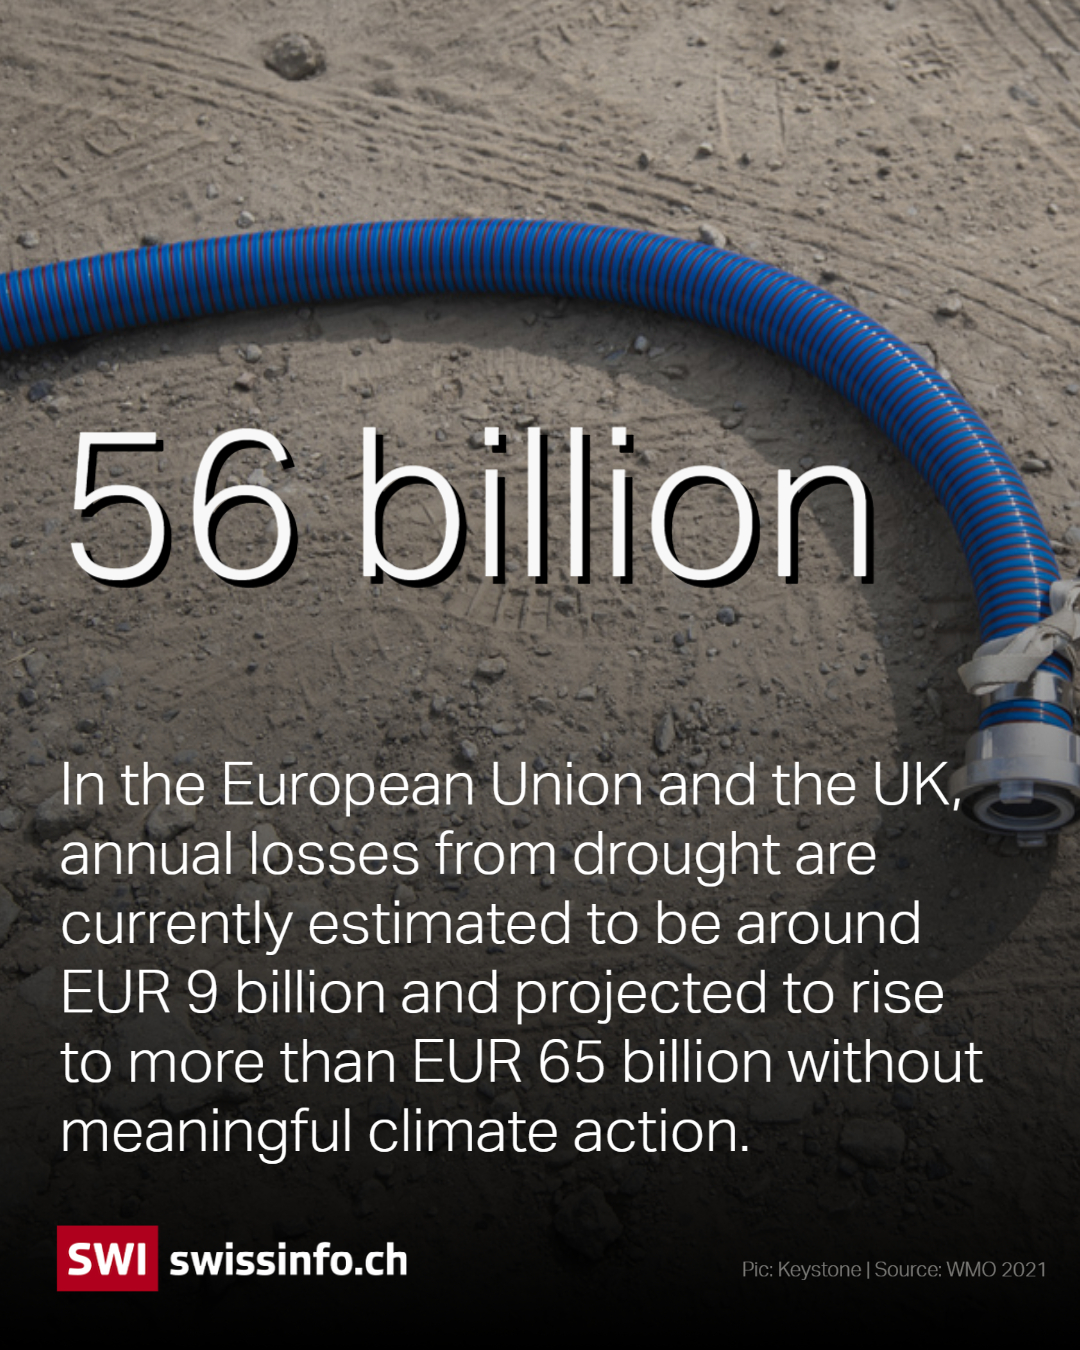 The European Union and UK will experience up to 65 billion in losses due to droughts